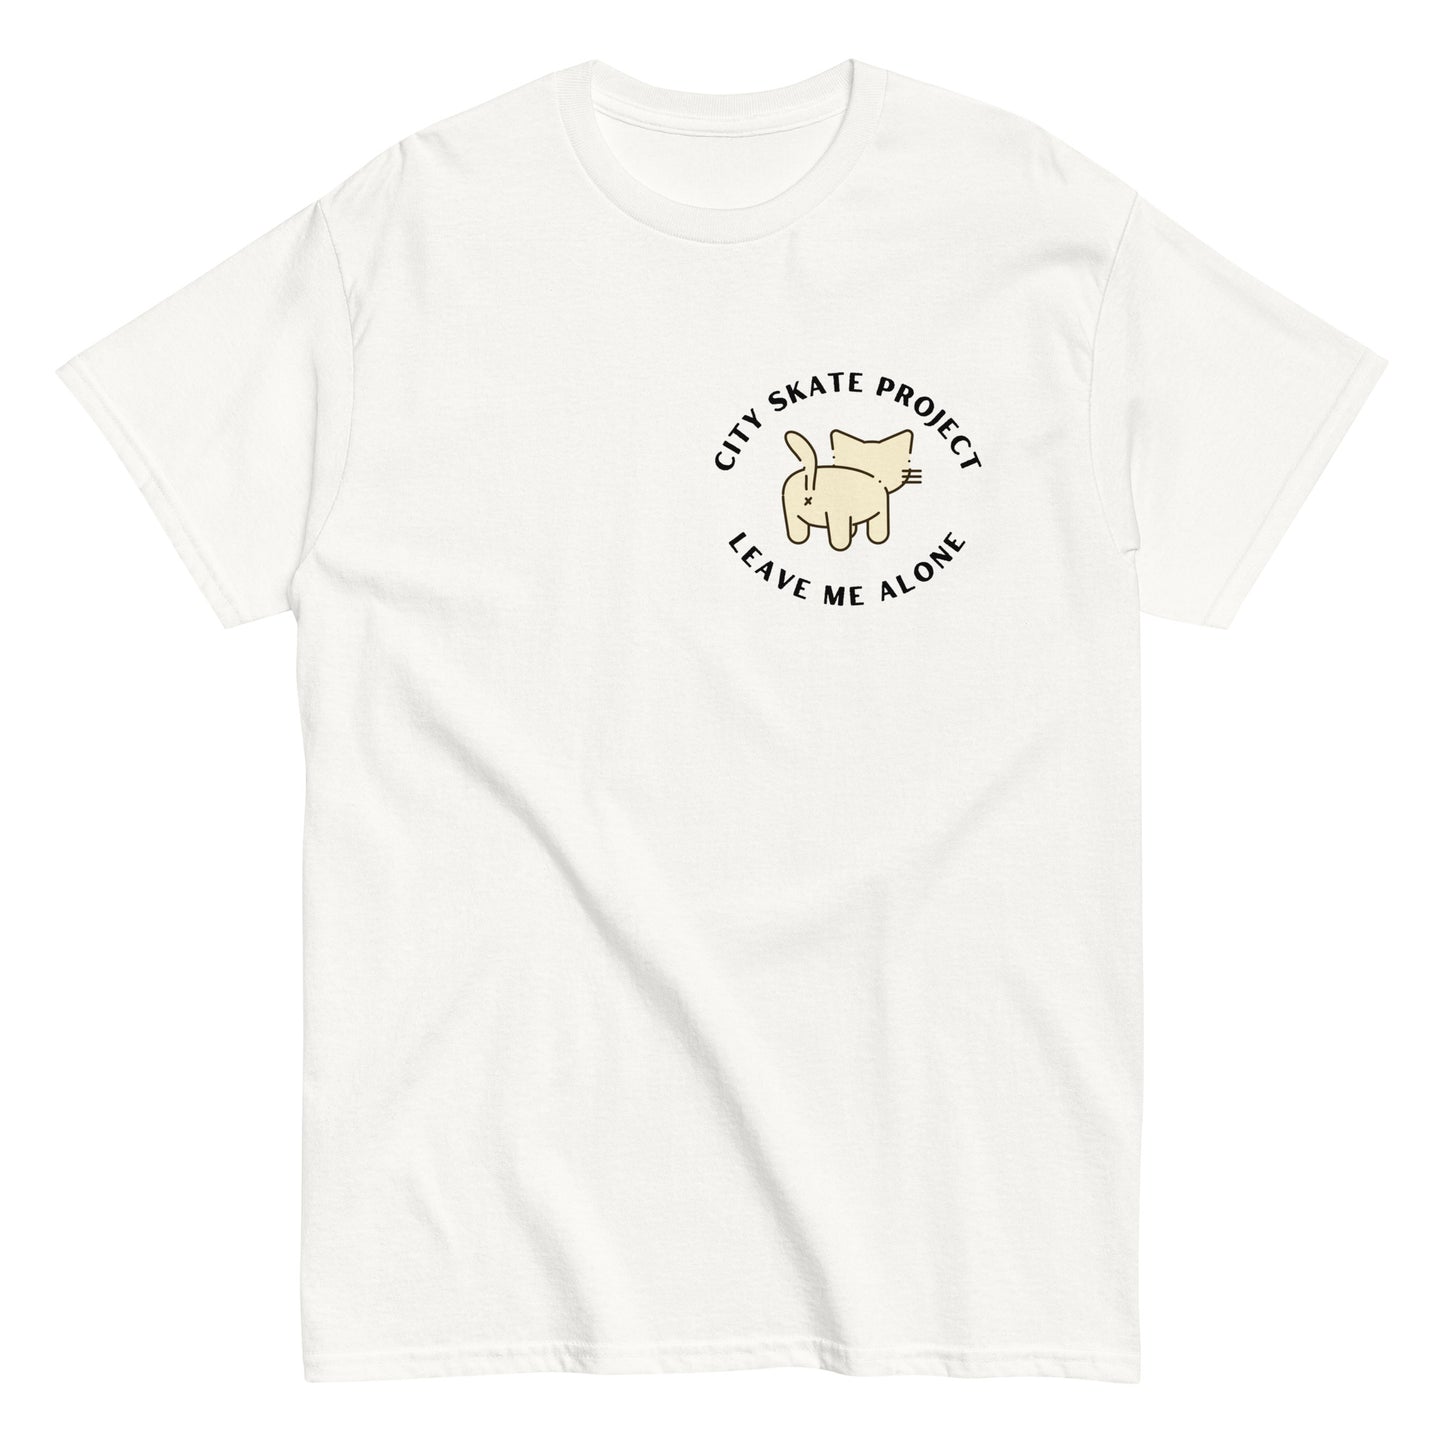 City Skate Project Mad Cat classic tee